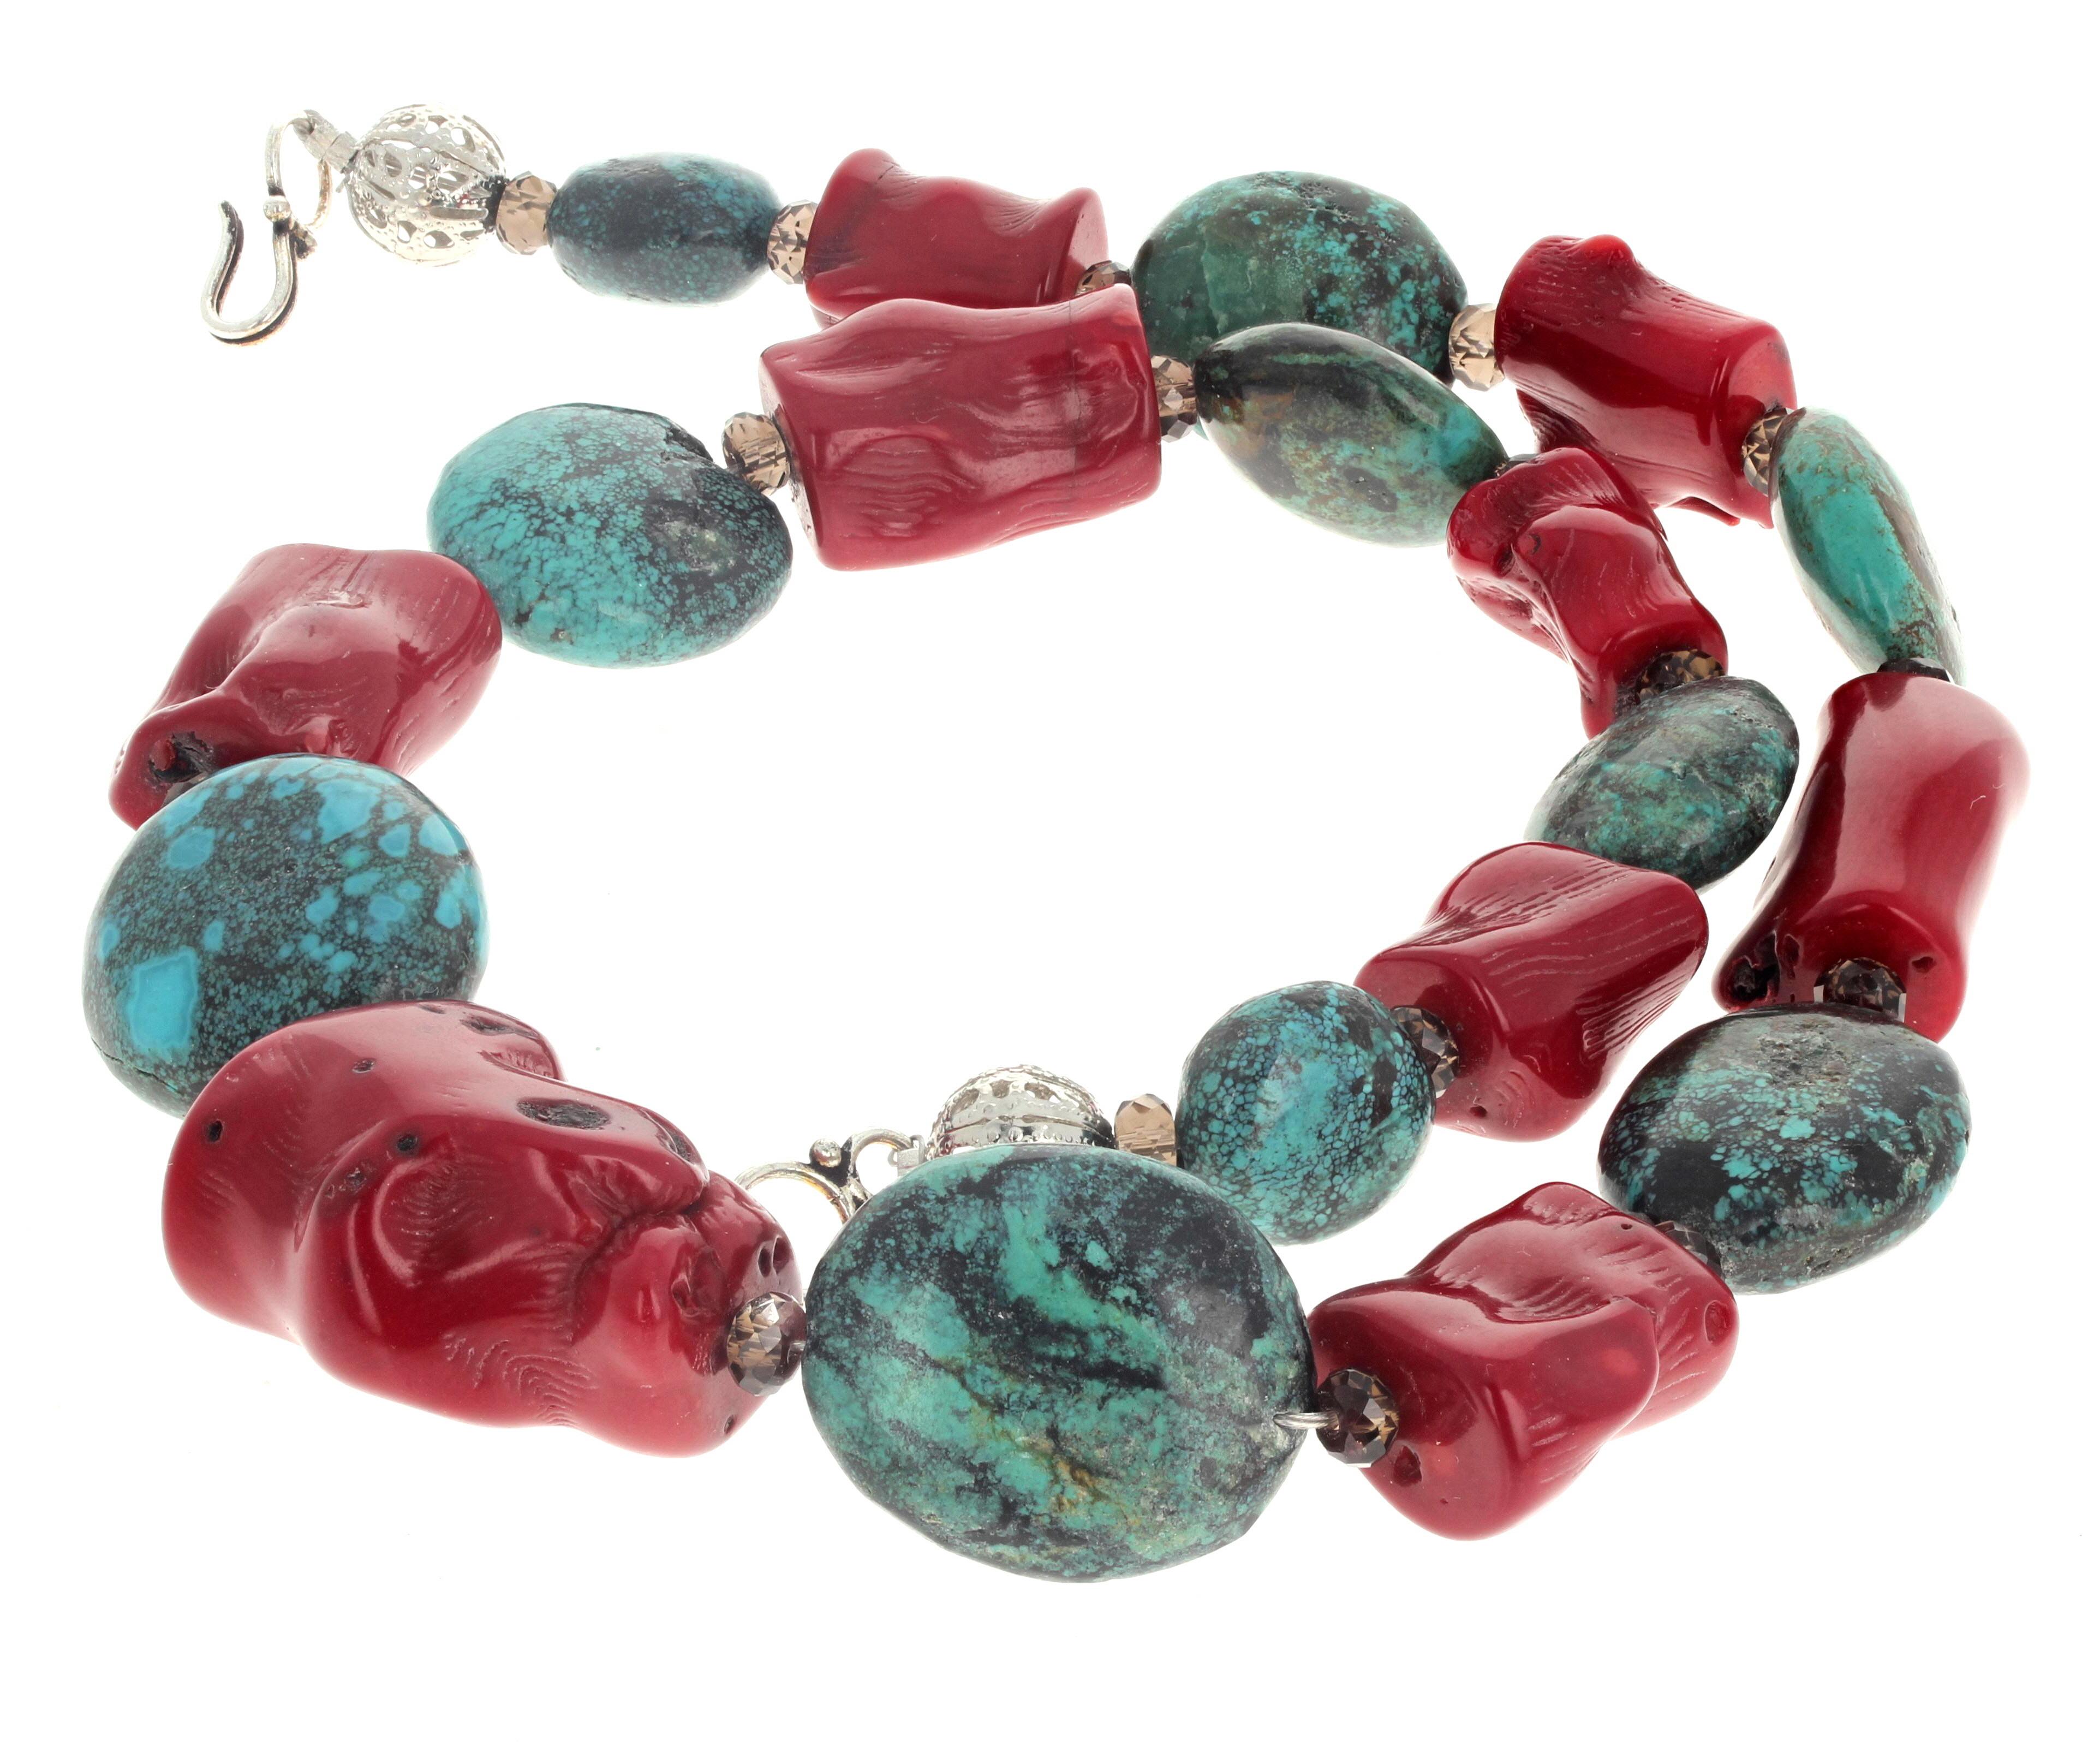 This 23 inch long beautiful artistic necklace is natural polished Turquoise and natural red Bamboo Coral enhanced with glittering brilliant Smoky Quartz.  The largest center Coral is 35mm x 24 1/2mm.  The easy to use hook clasp is silver.  